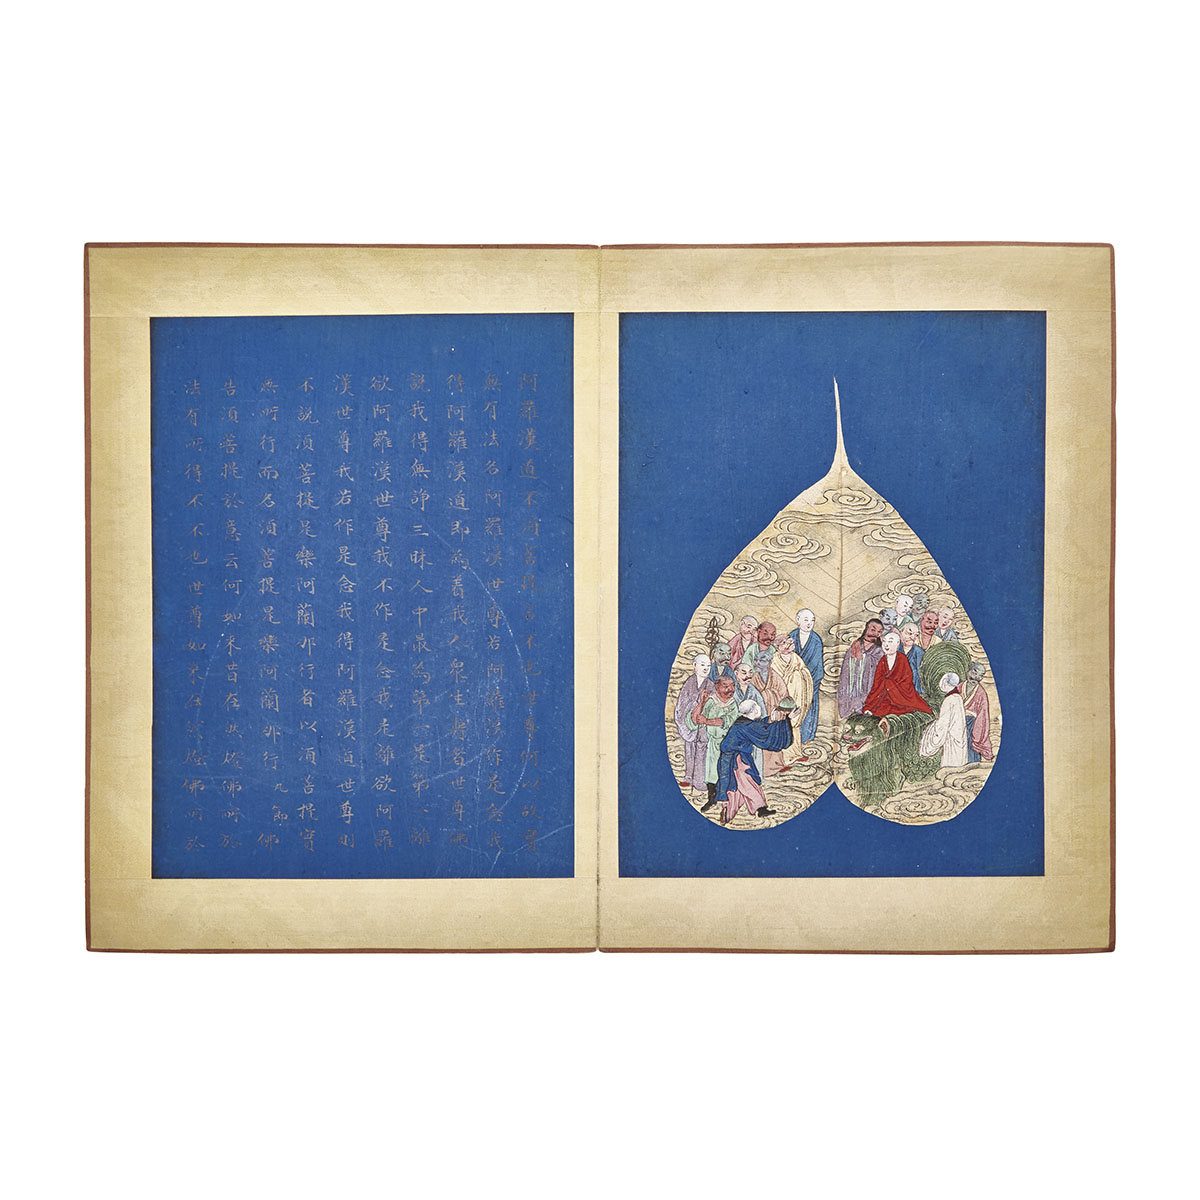 Bodhi Leaf Sutra Pages, Qing Dynasty, 19th Century